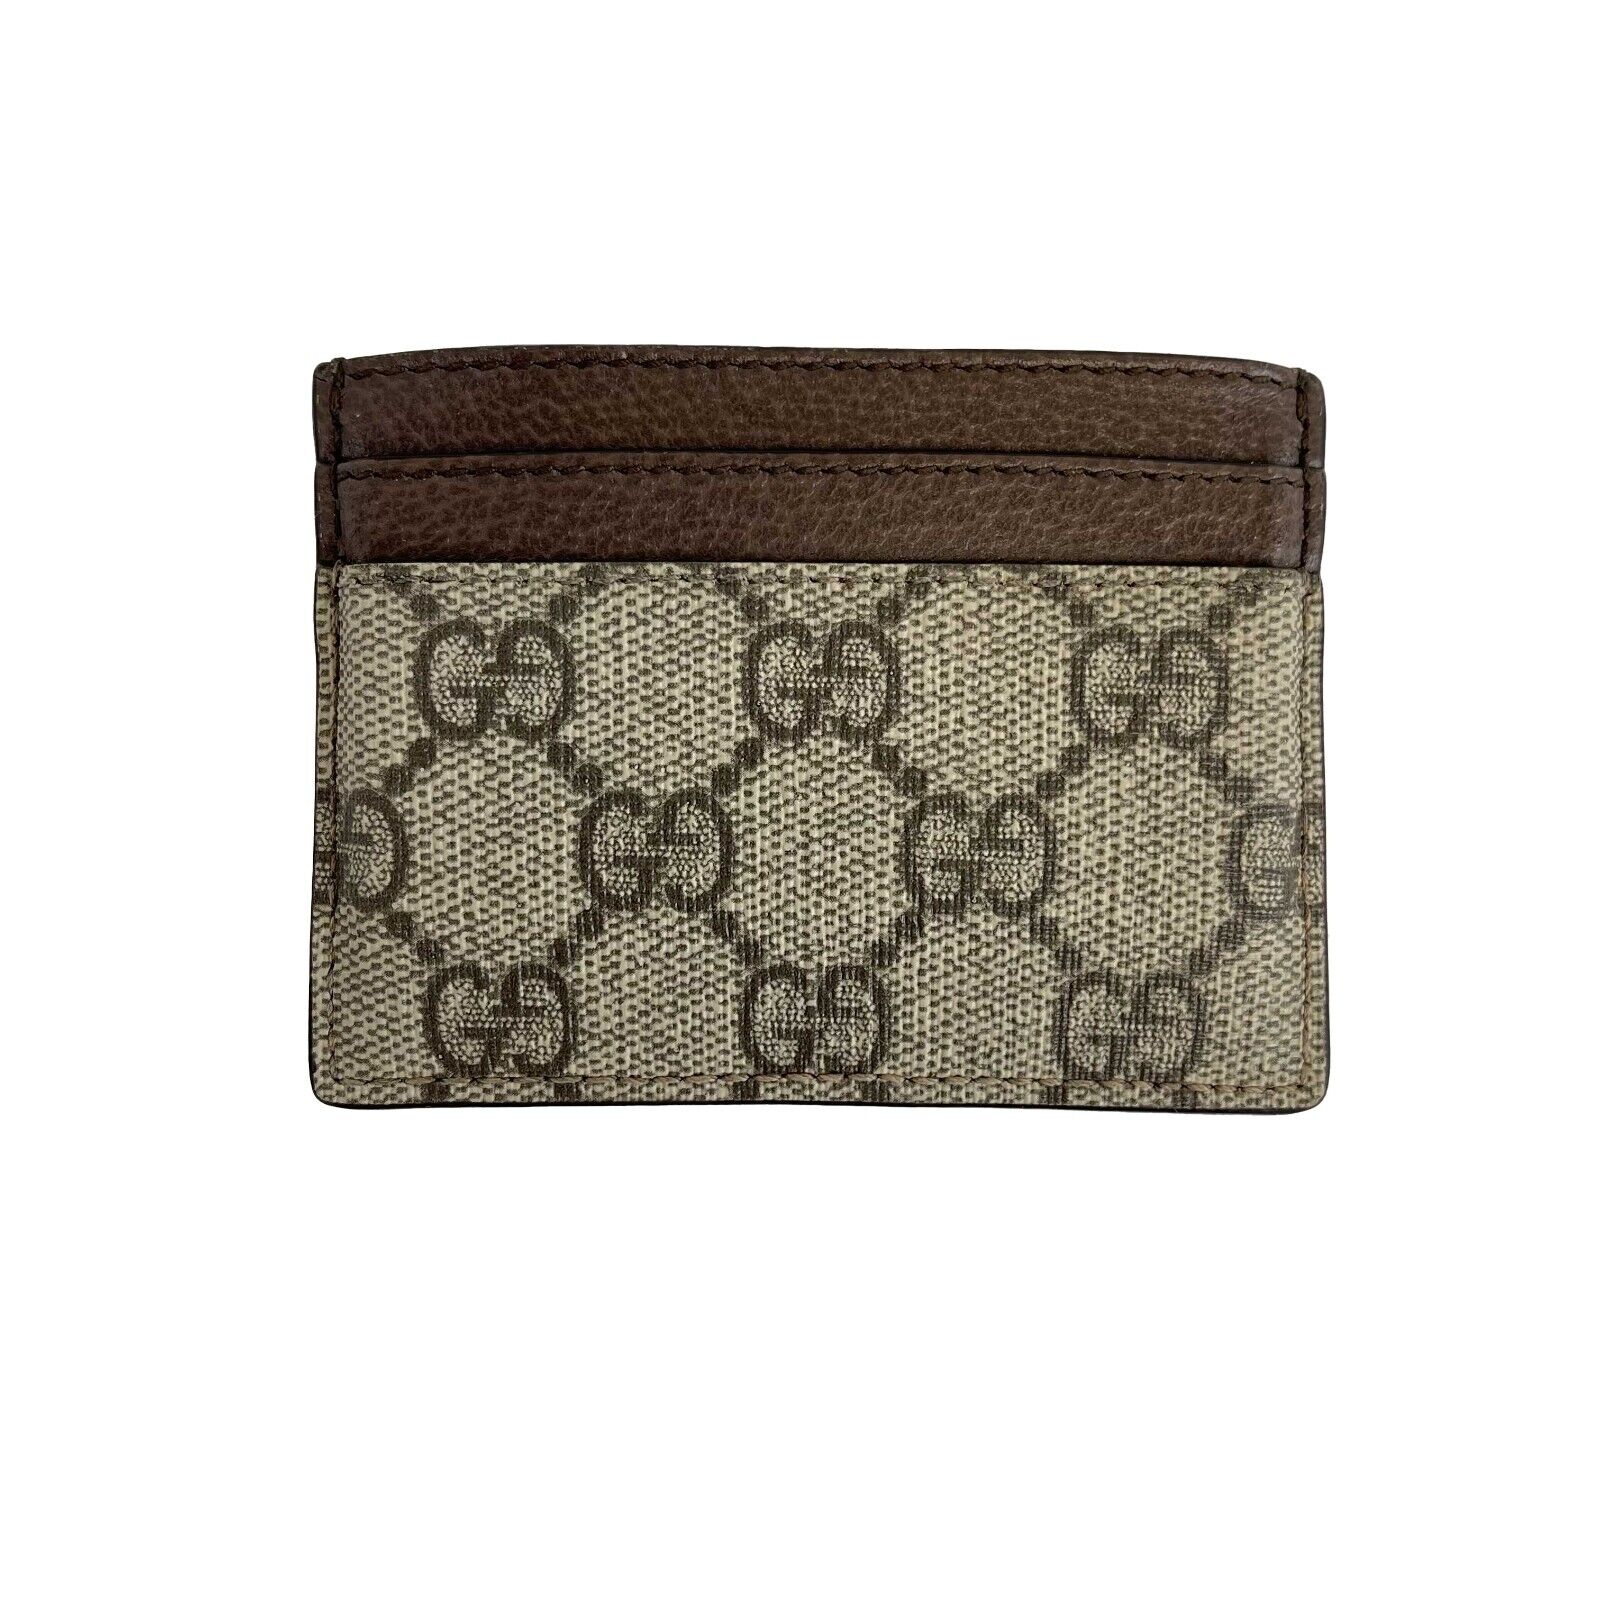 GUCCI - Ophidia GG Brown Card Case - Full Kit